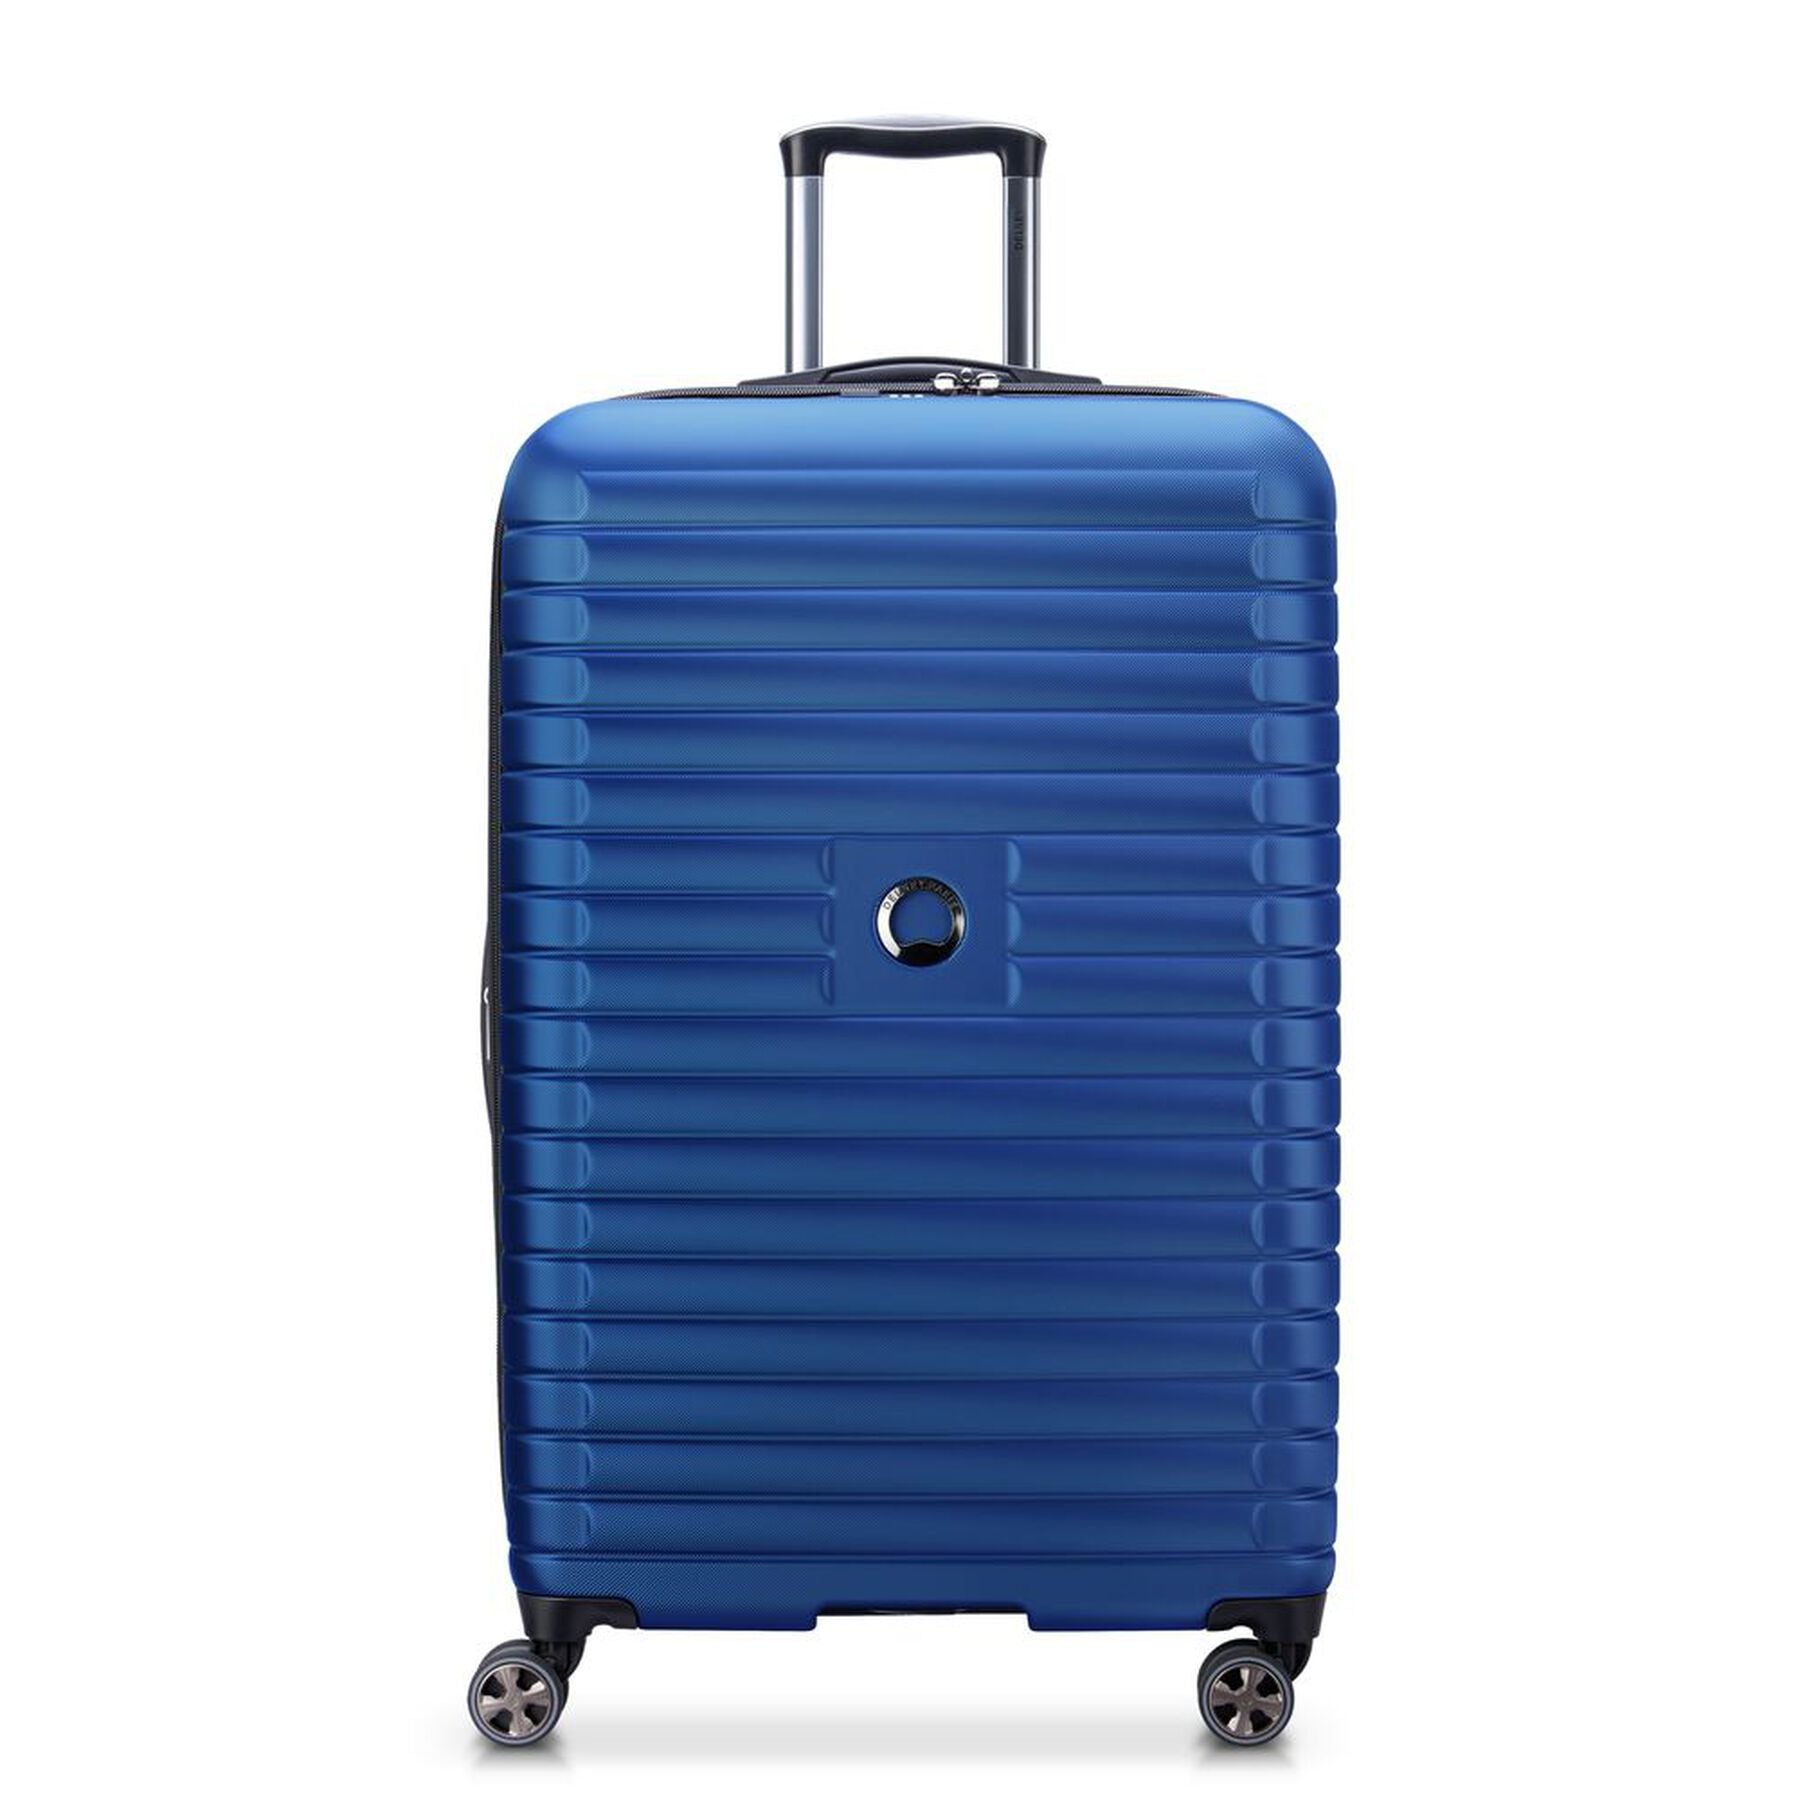 Onrustig Tact God Delsey Cruise 3 28in EXPANDABLE SPINNER UPRIGHT | Altman Luggage – Altman  Luggage